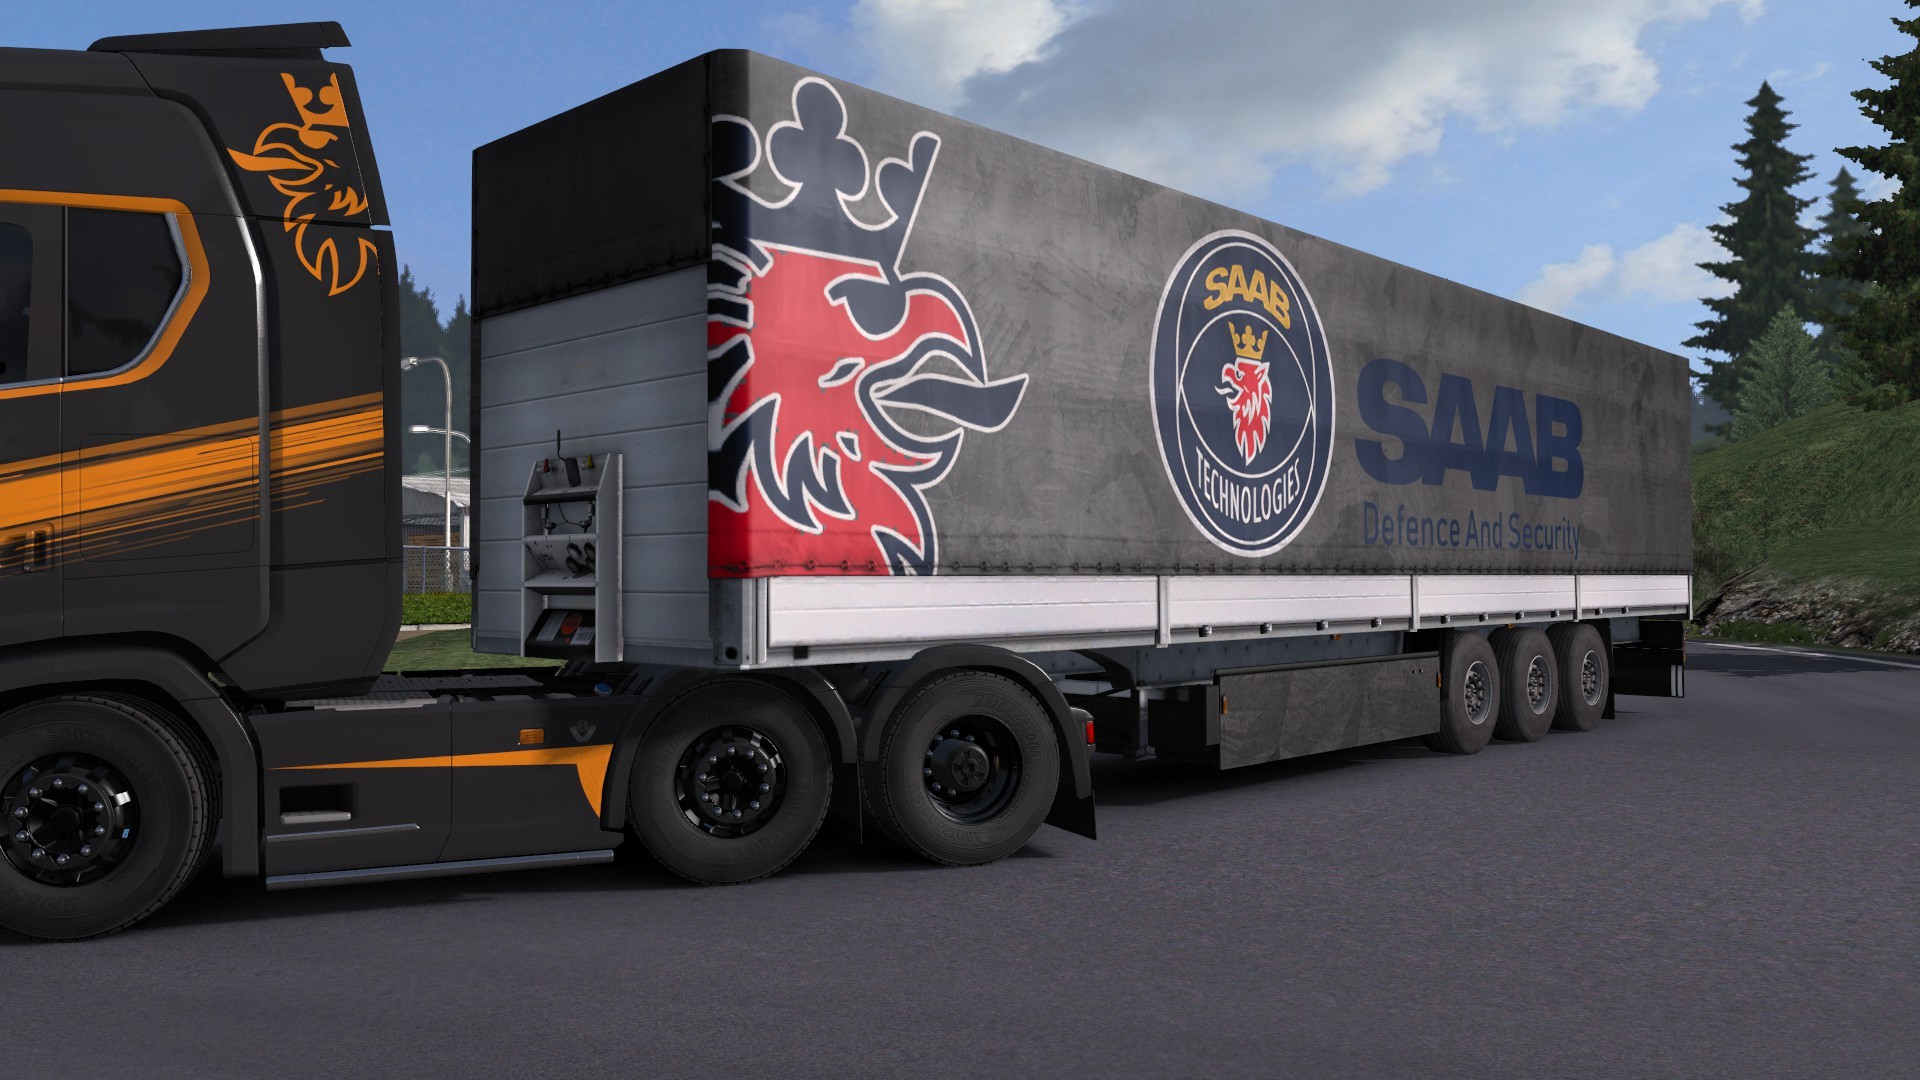 Saab Technologies Trailer by l1zzy